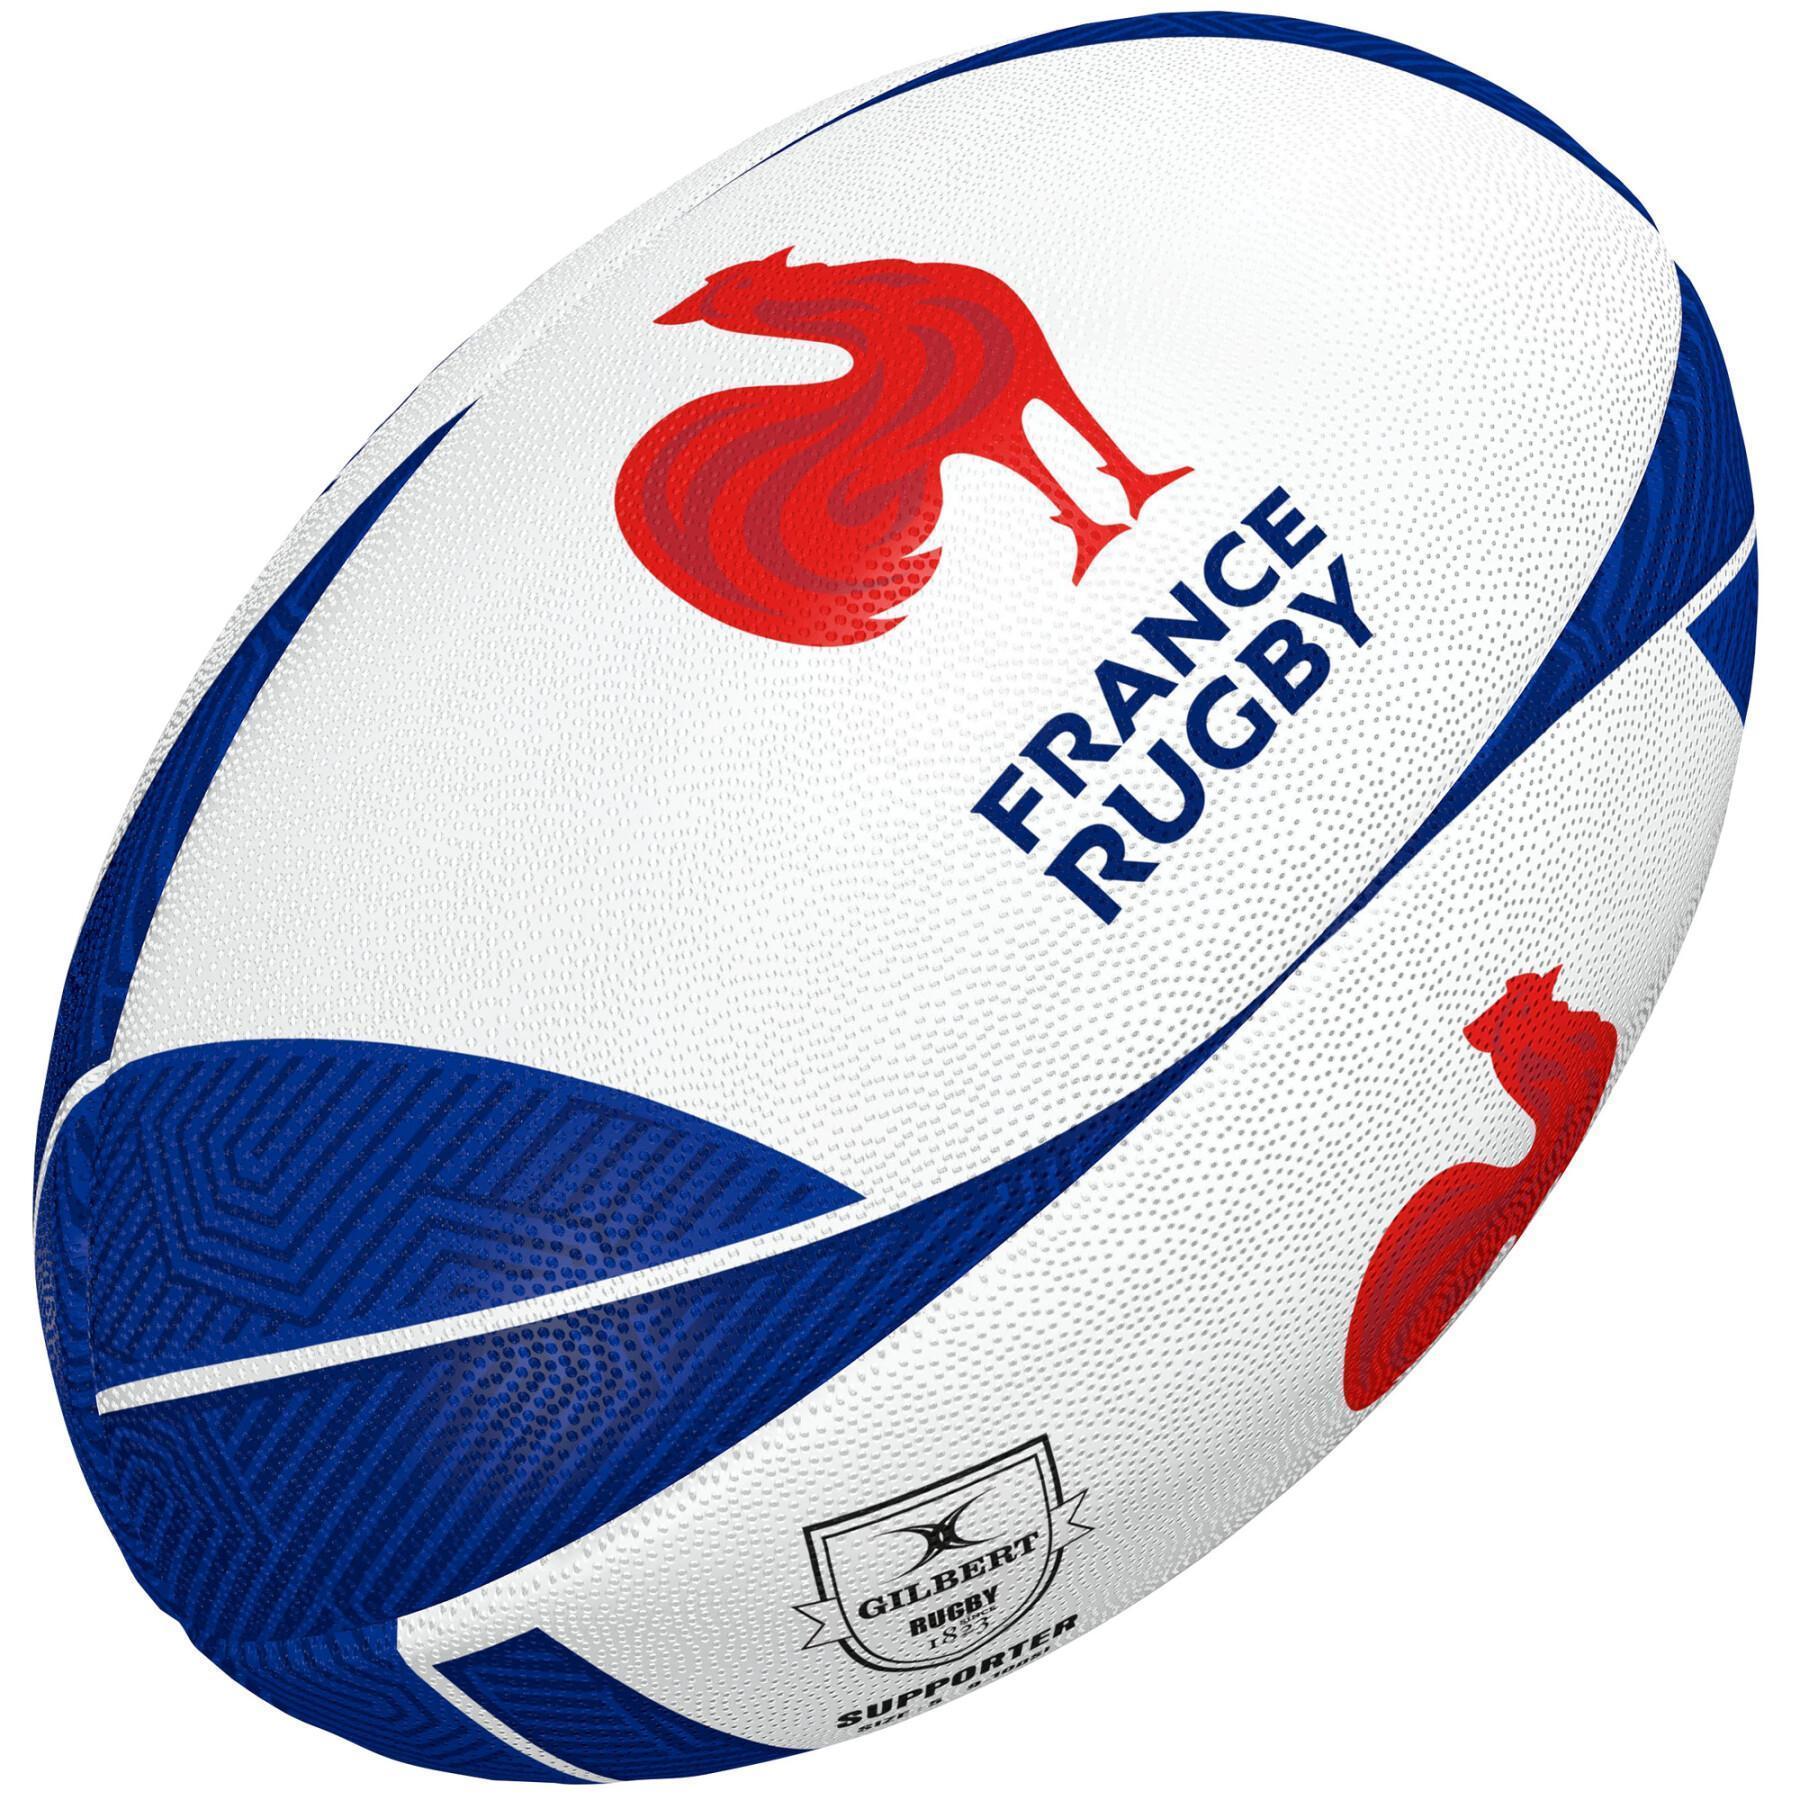 Bola de Rugby France Sup